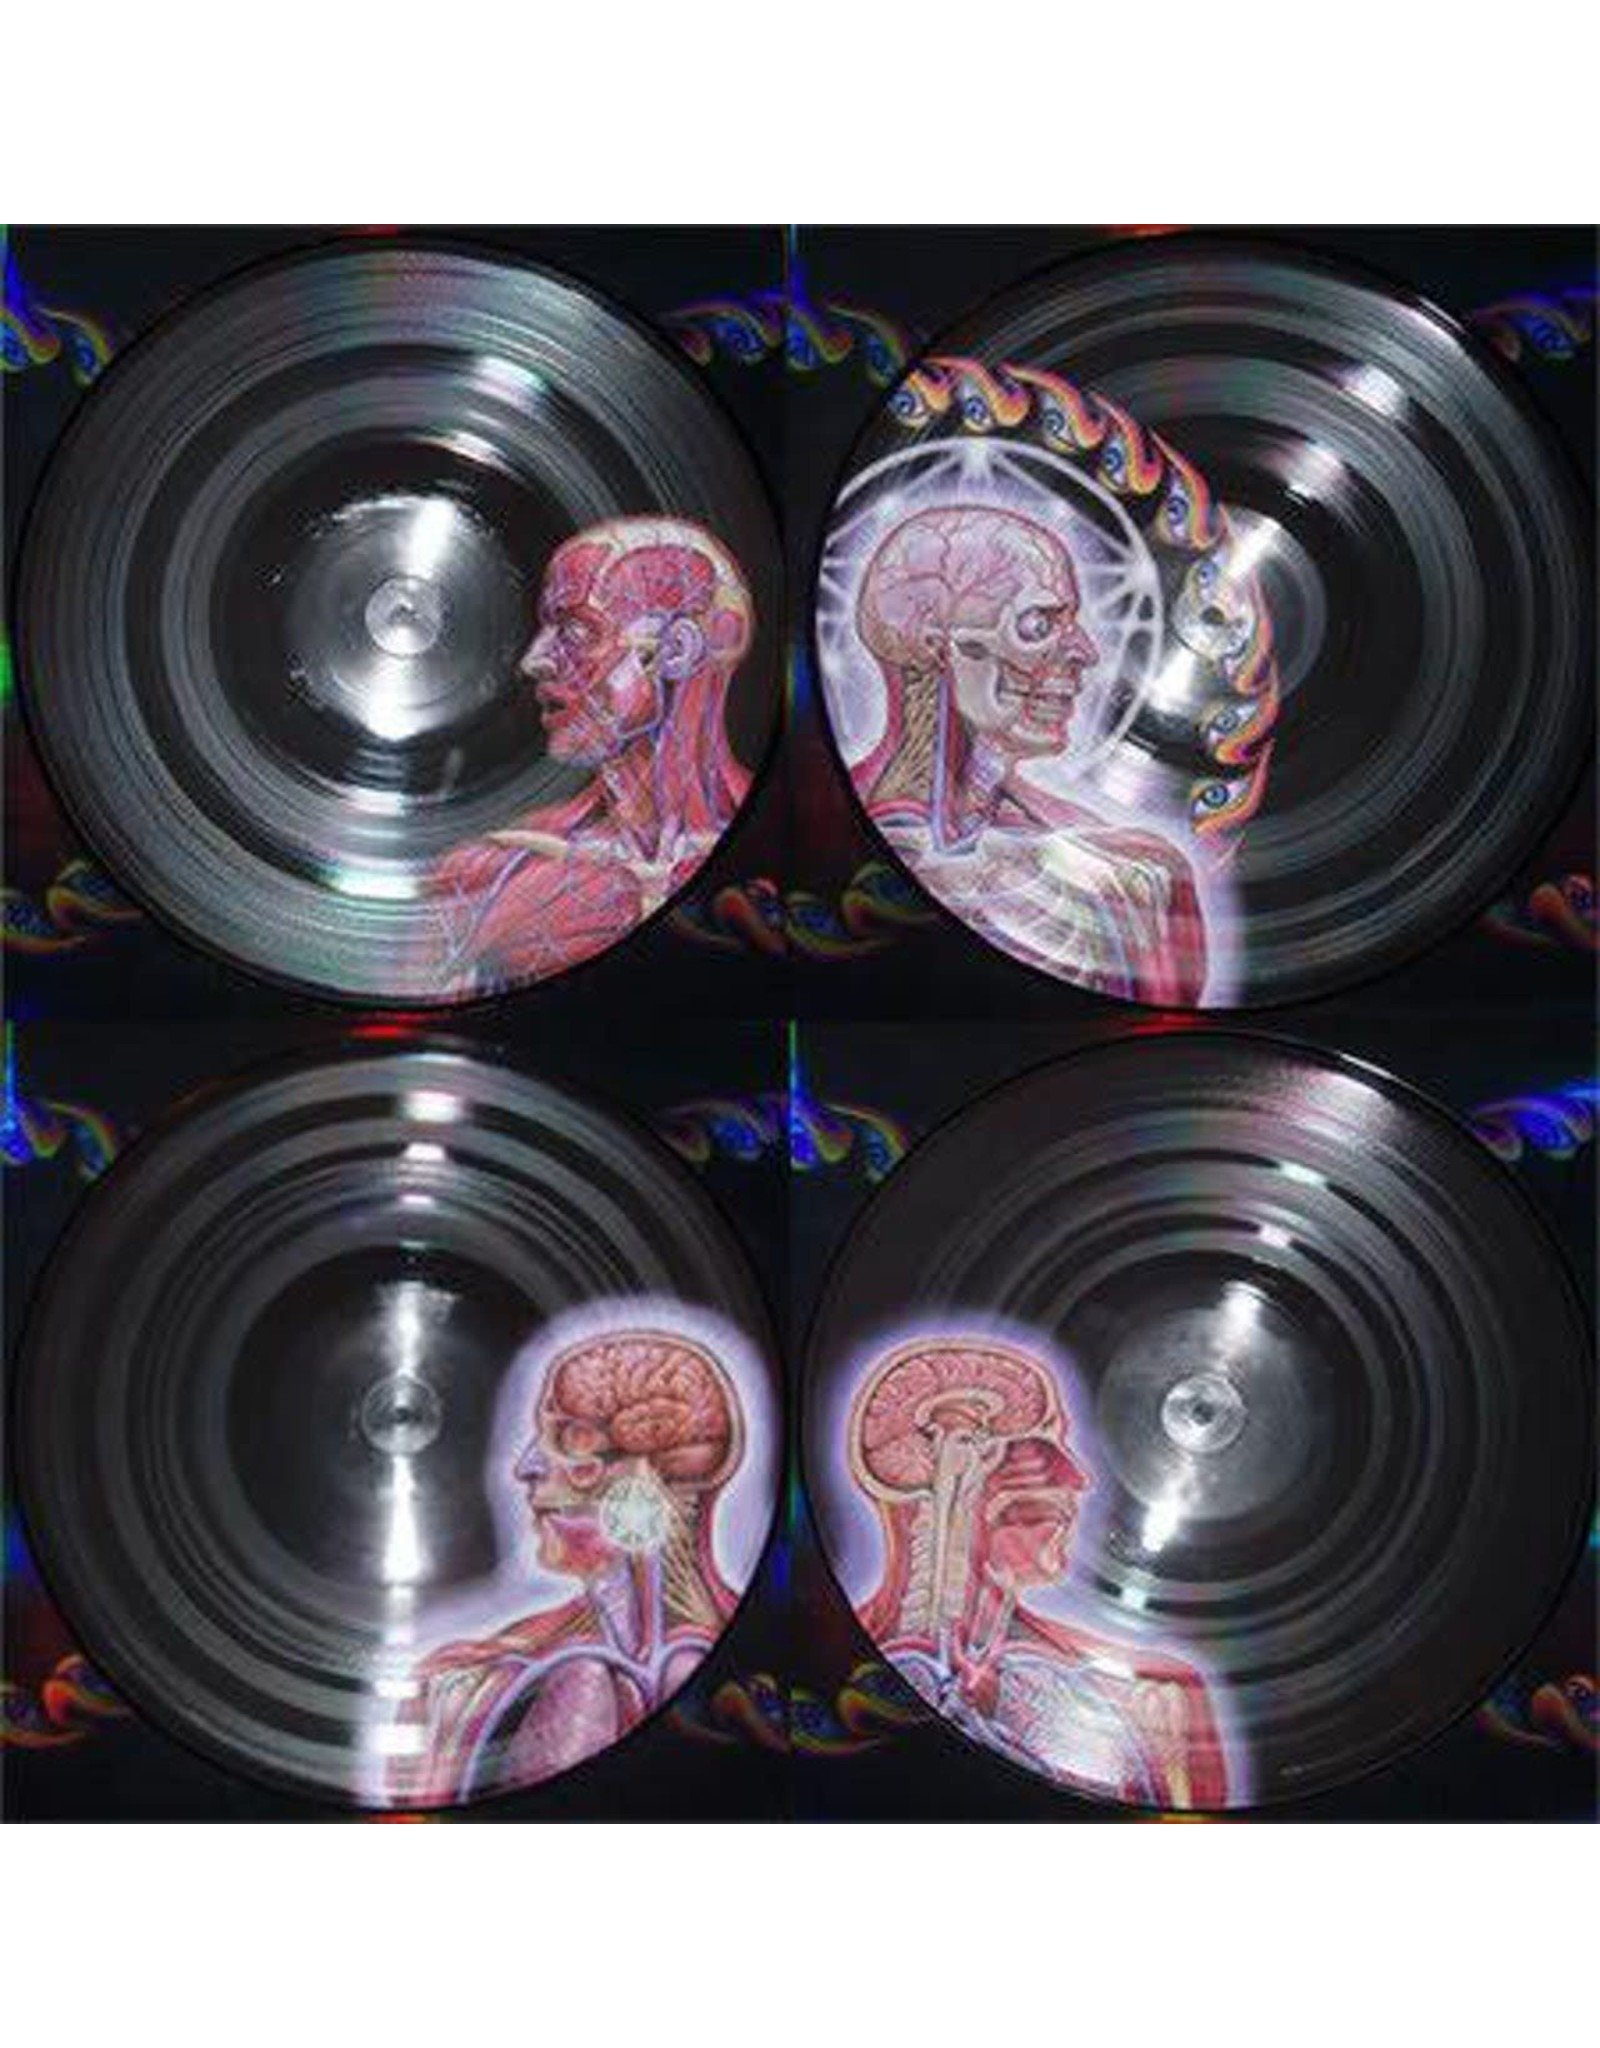 Tool - Lateralus (Limited Edition)